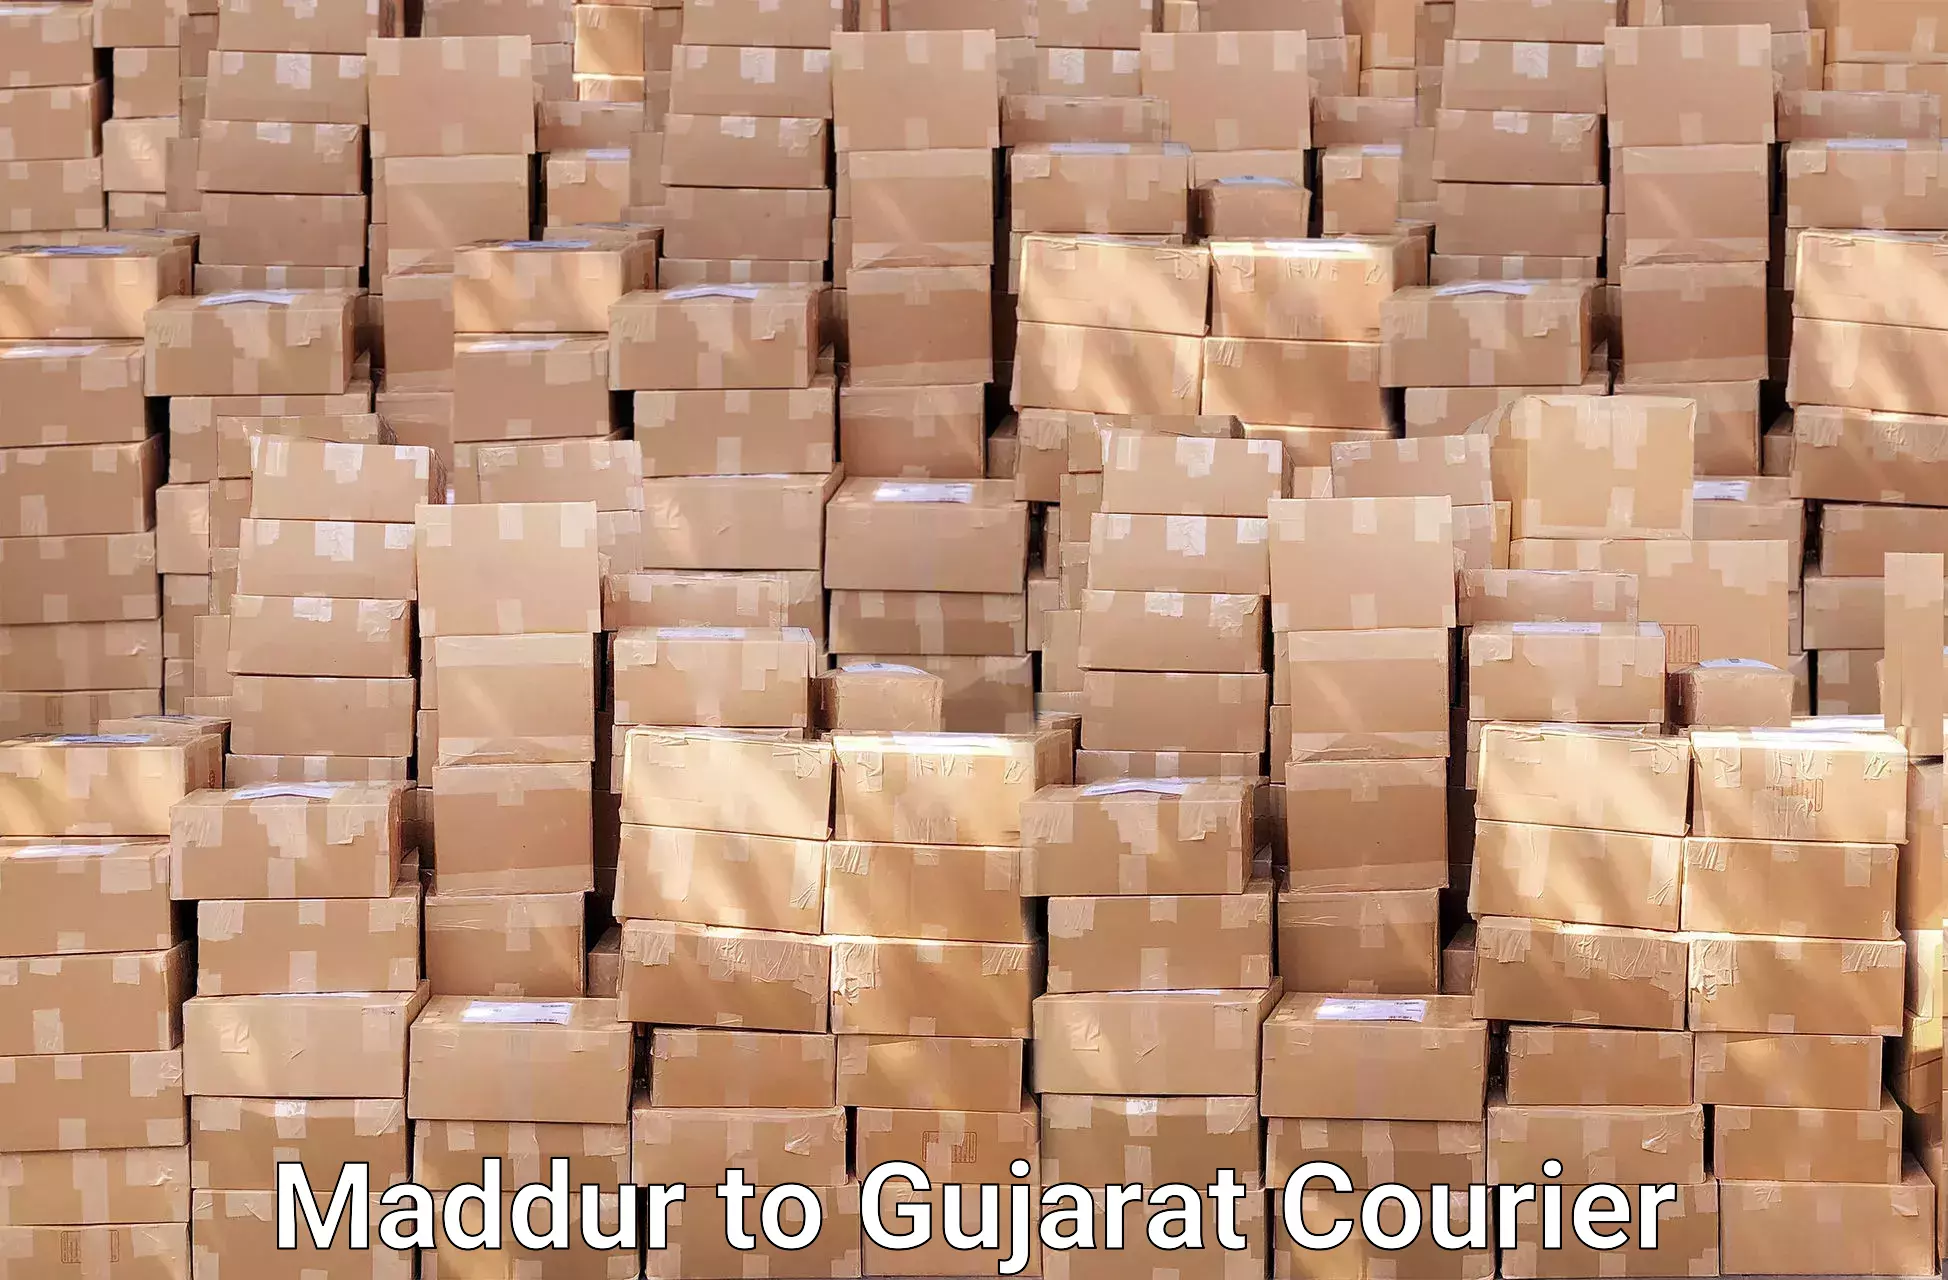 Furniture moving specialists Maddur to Amreli